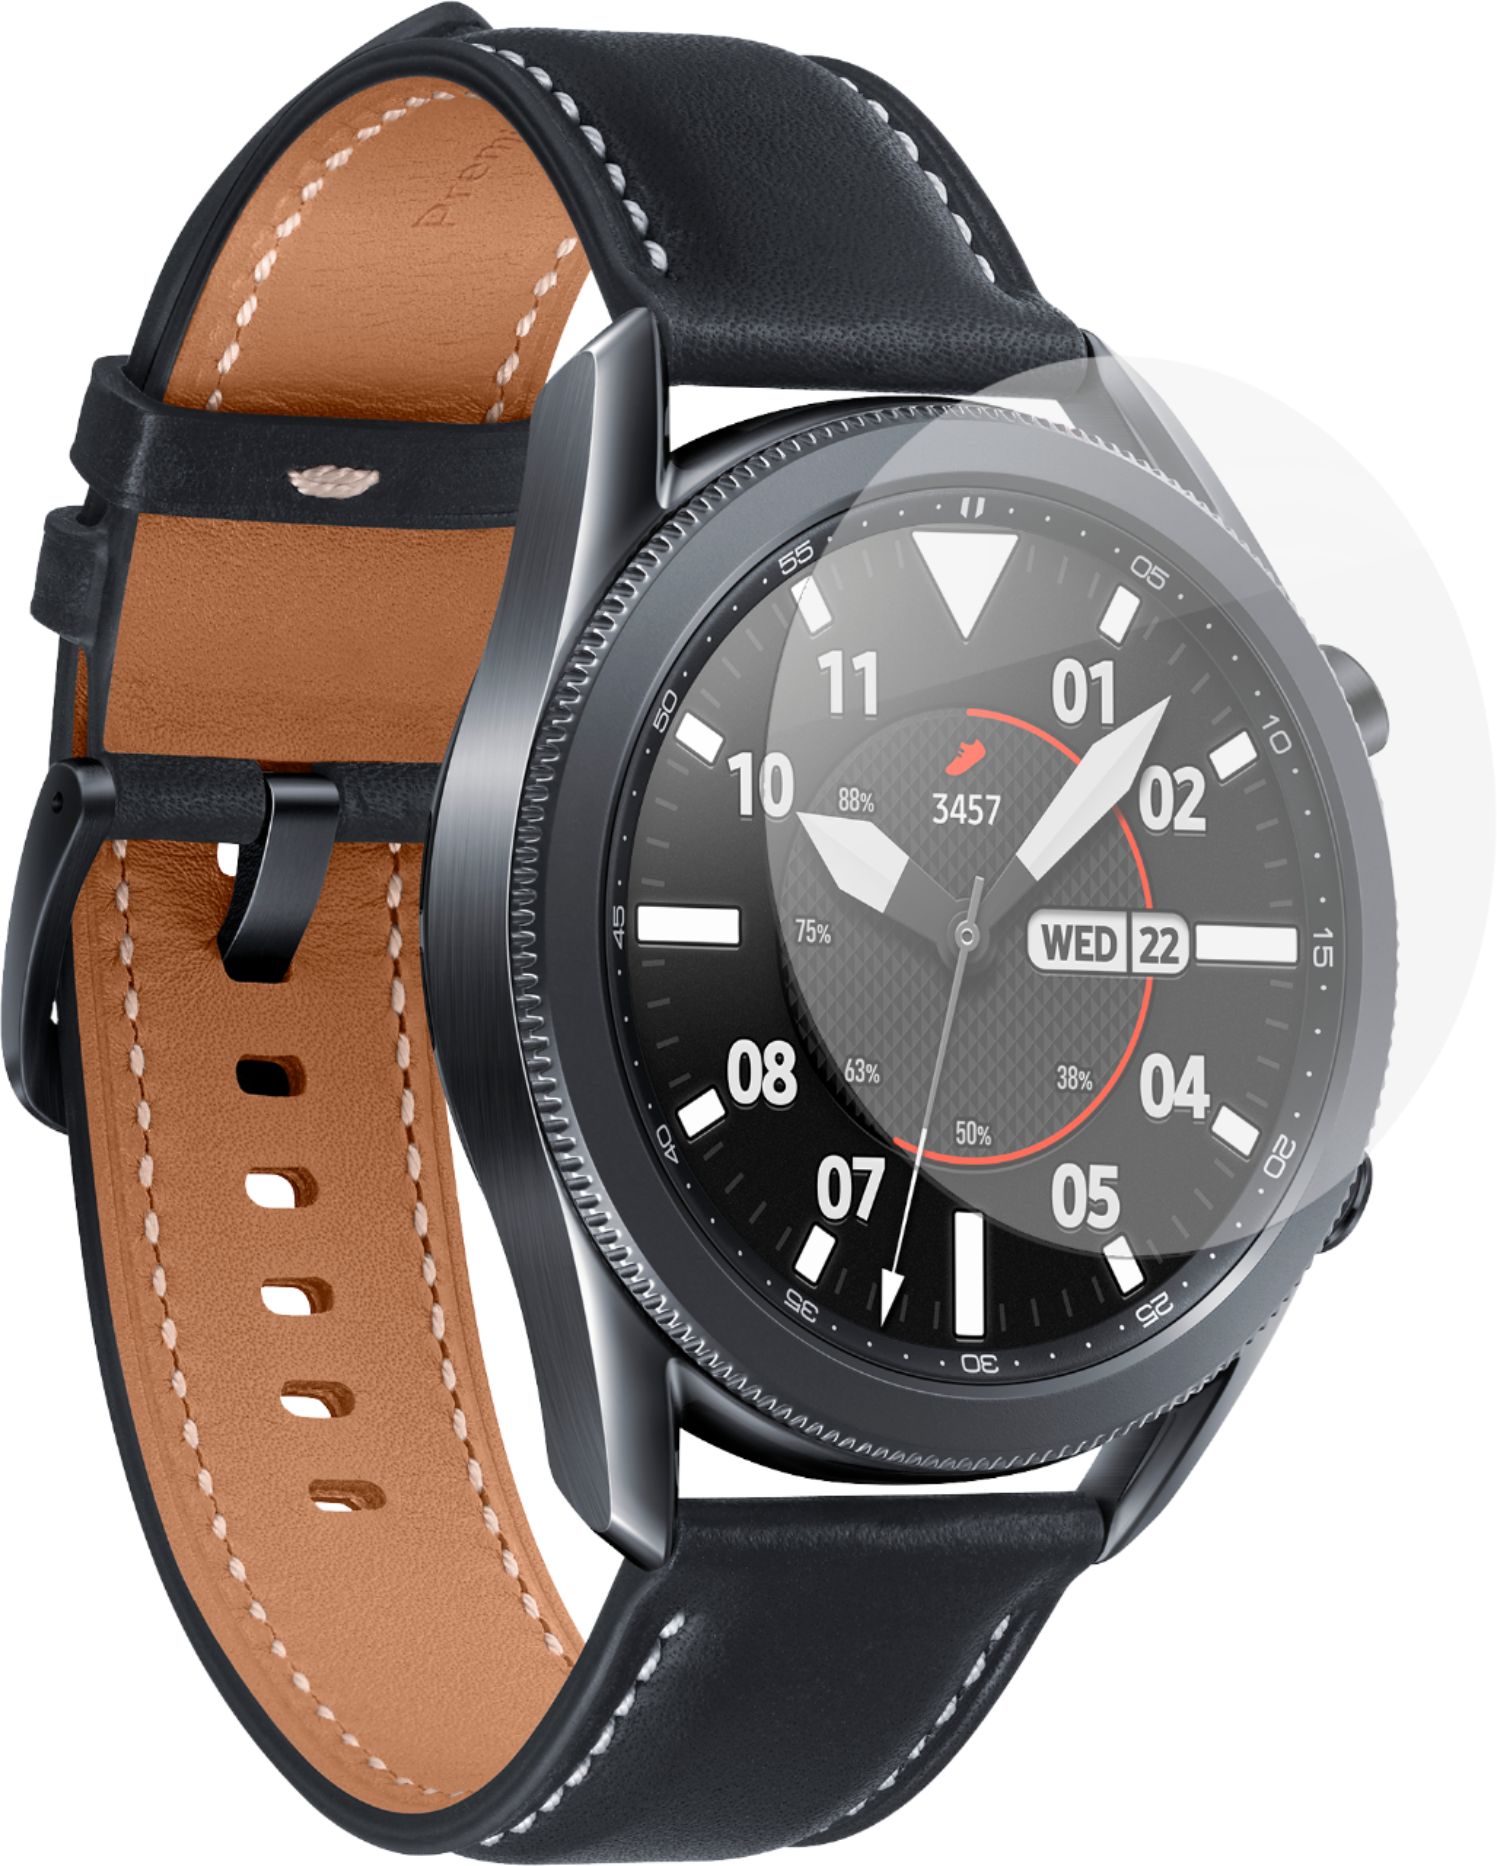 Left View: ZAGG - InvisibleShield GlassFusion+ Flexible Hybrid Screen Protector for Samsung Galaxy Watch3 41mm